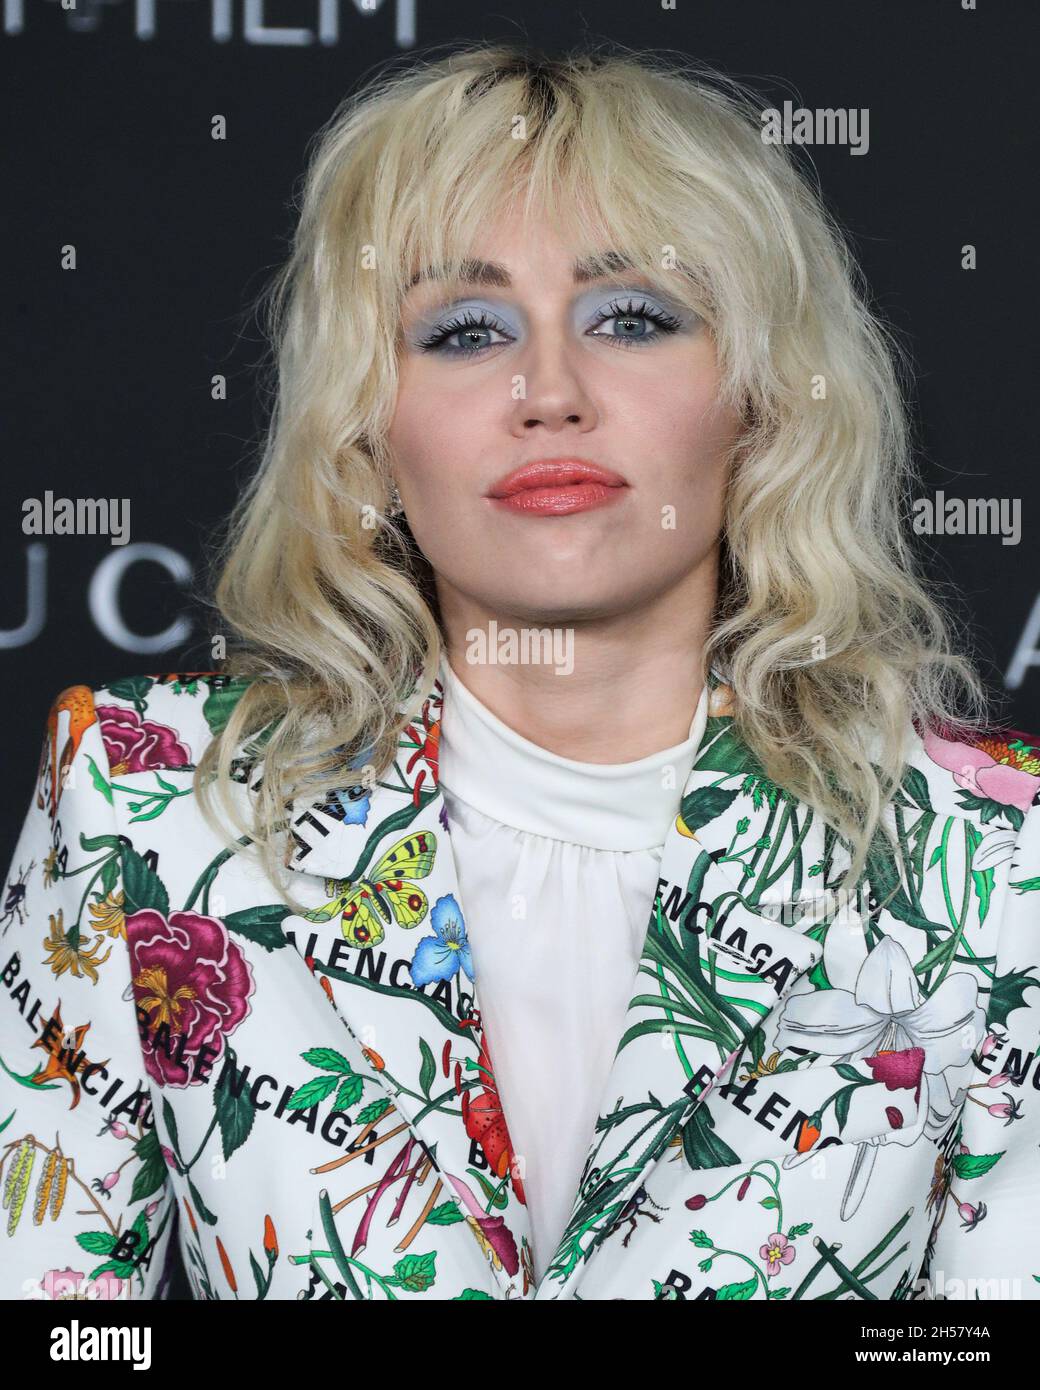 LOS ANGELES, CALIFORNIA, USA - NOVEMBER 06: Singer Miley Cyrus wearing a Gucci X Balenciaga suit and Jared Lehr jewelry arrives at the 10th Annual LACMA Art + Film Gala 2021 held at the Los Angeles County Museum of Art on November 6, 2021 in Los Angeles, California, United States. (Photo by Xavier Collin/Image Press Agency/Sipa USA) Stock Photo